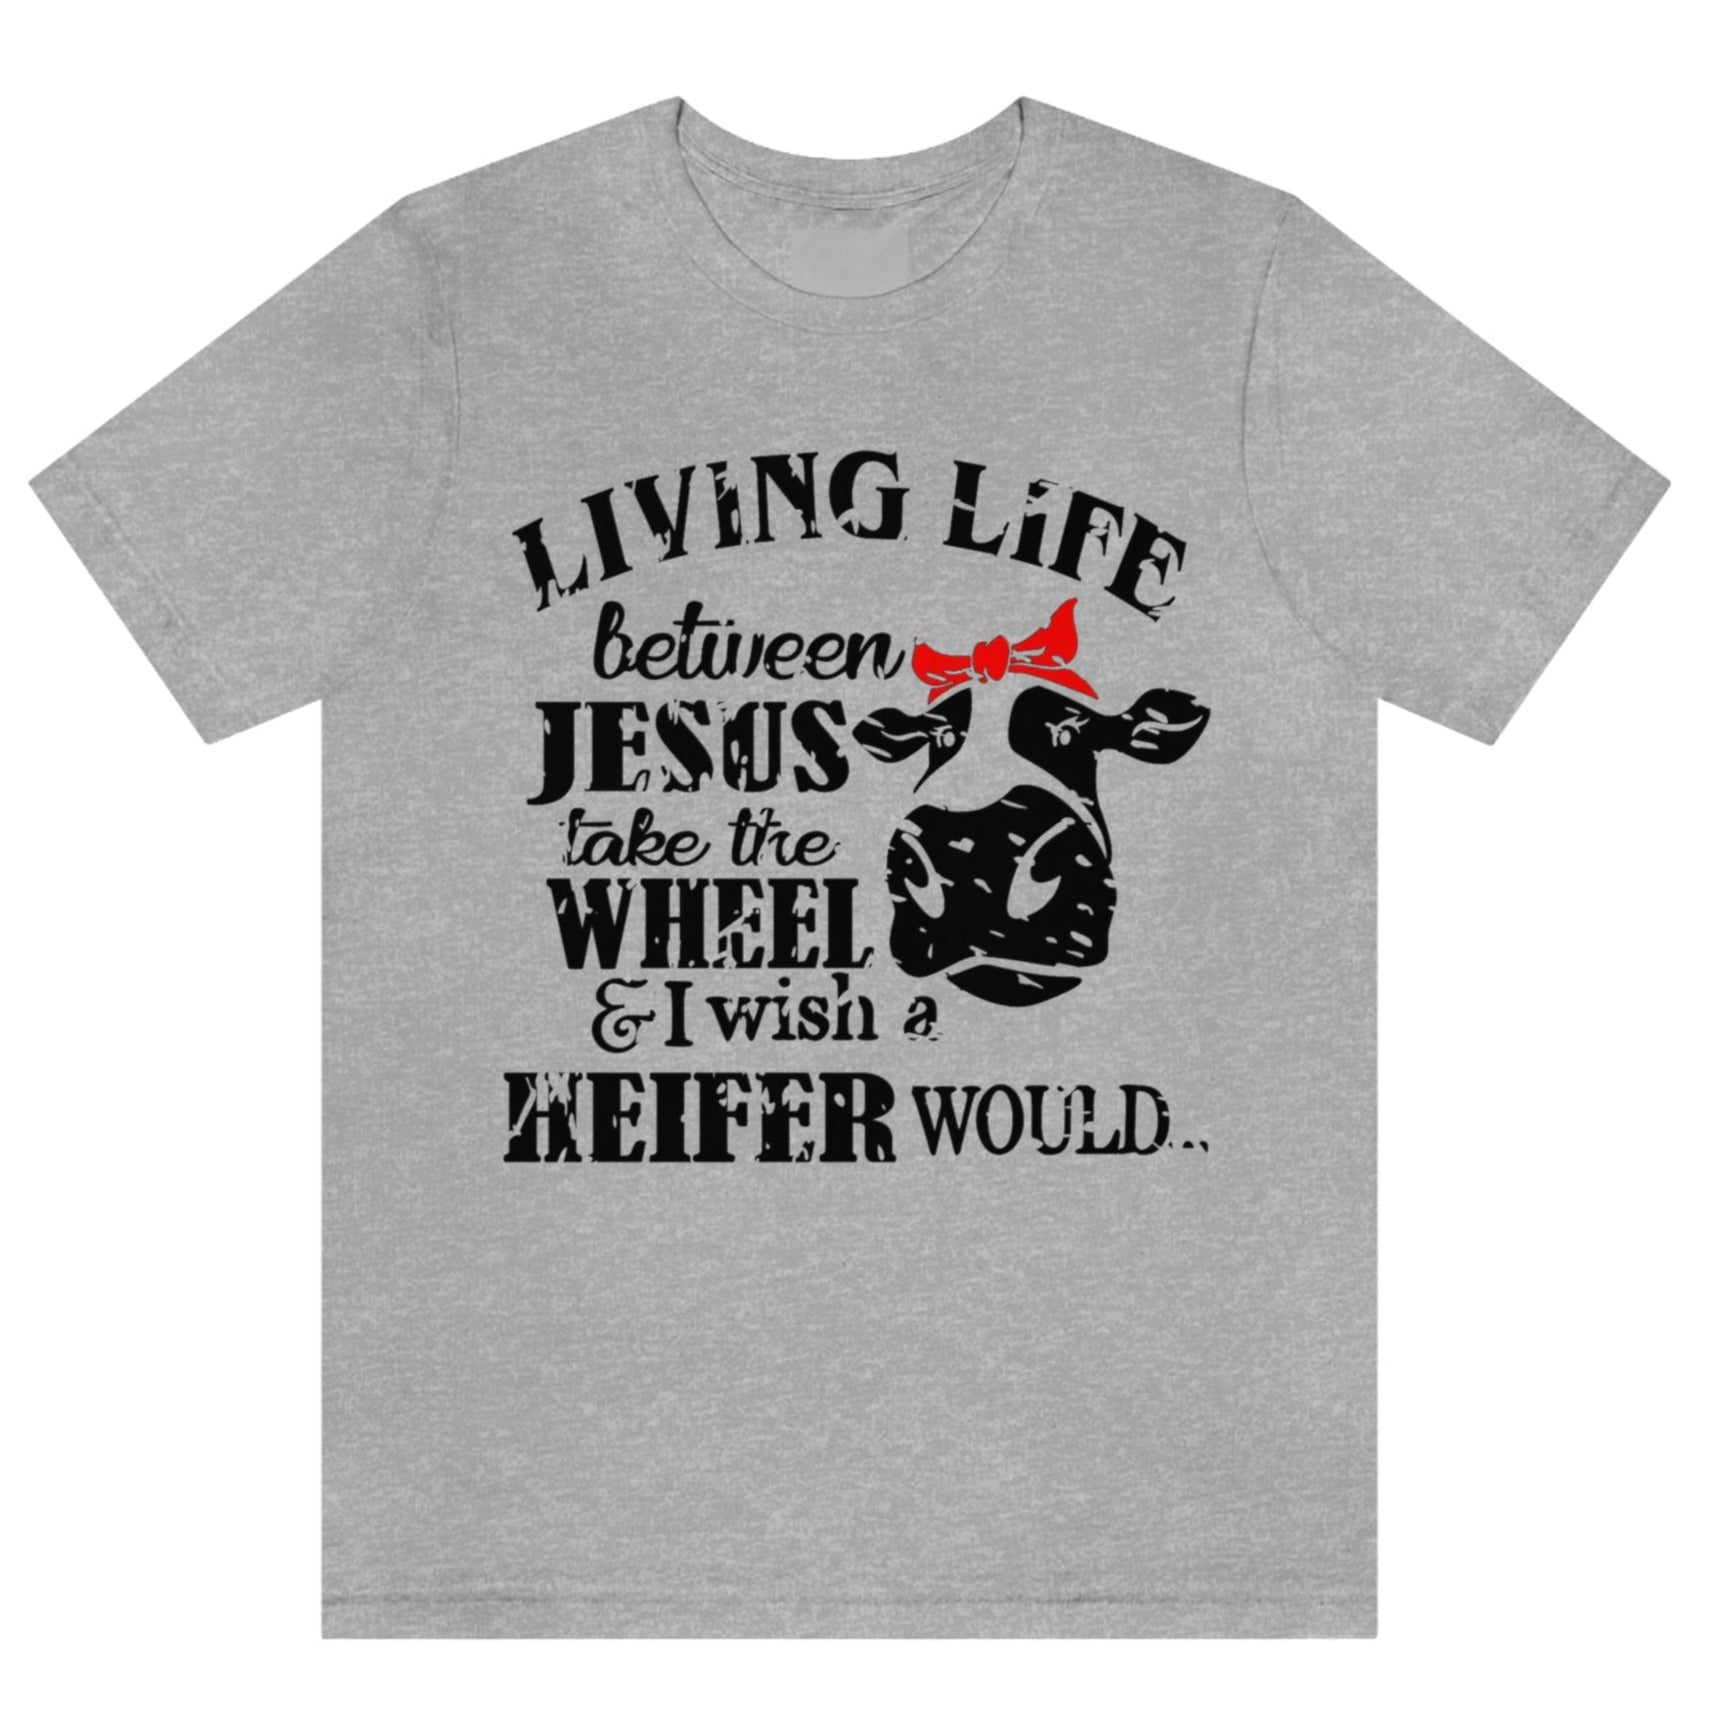 living-life-between-jesus-take-the-wheel-and-i-wish-a-heifer-would-athletic-heather-grey-t-shirt